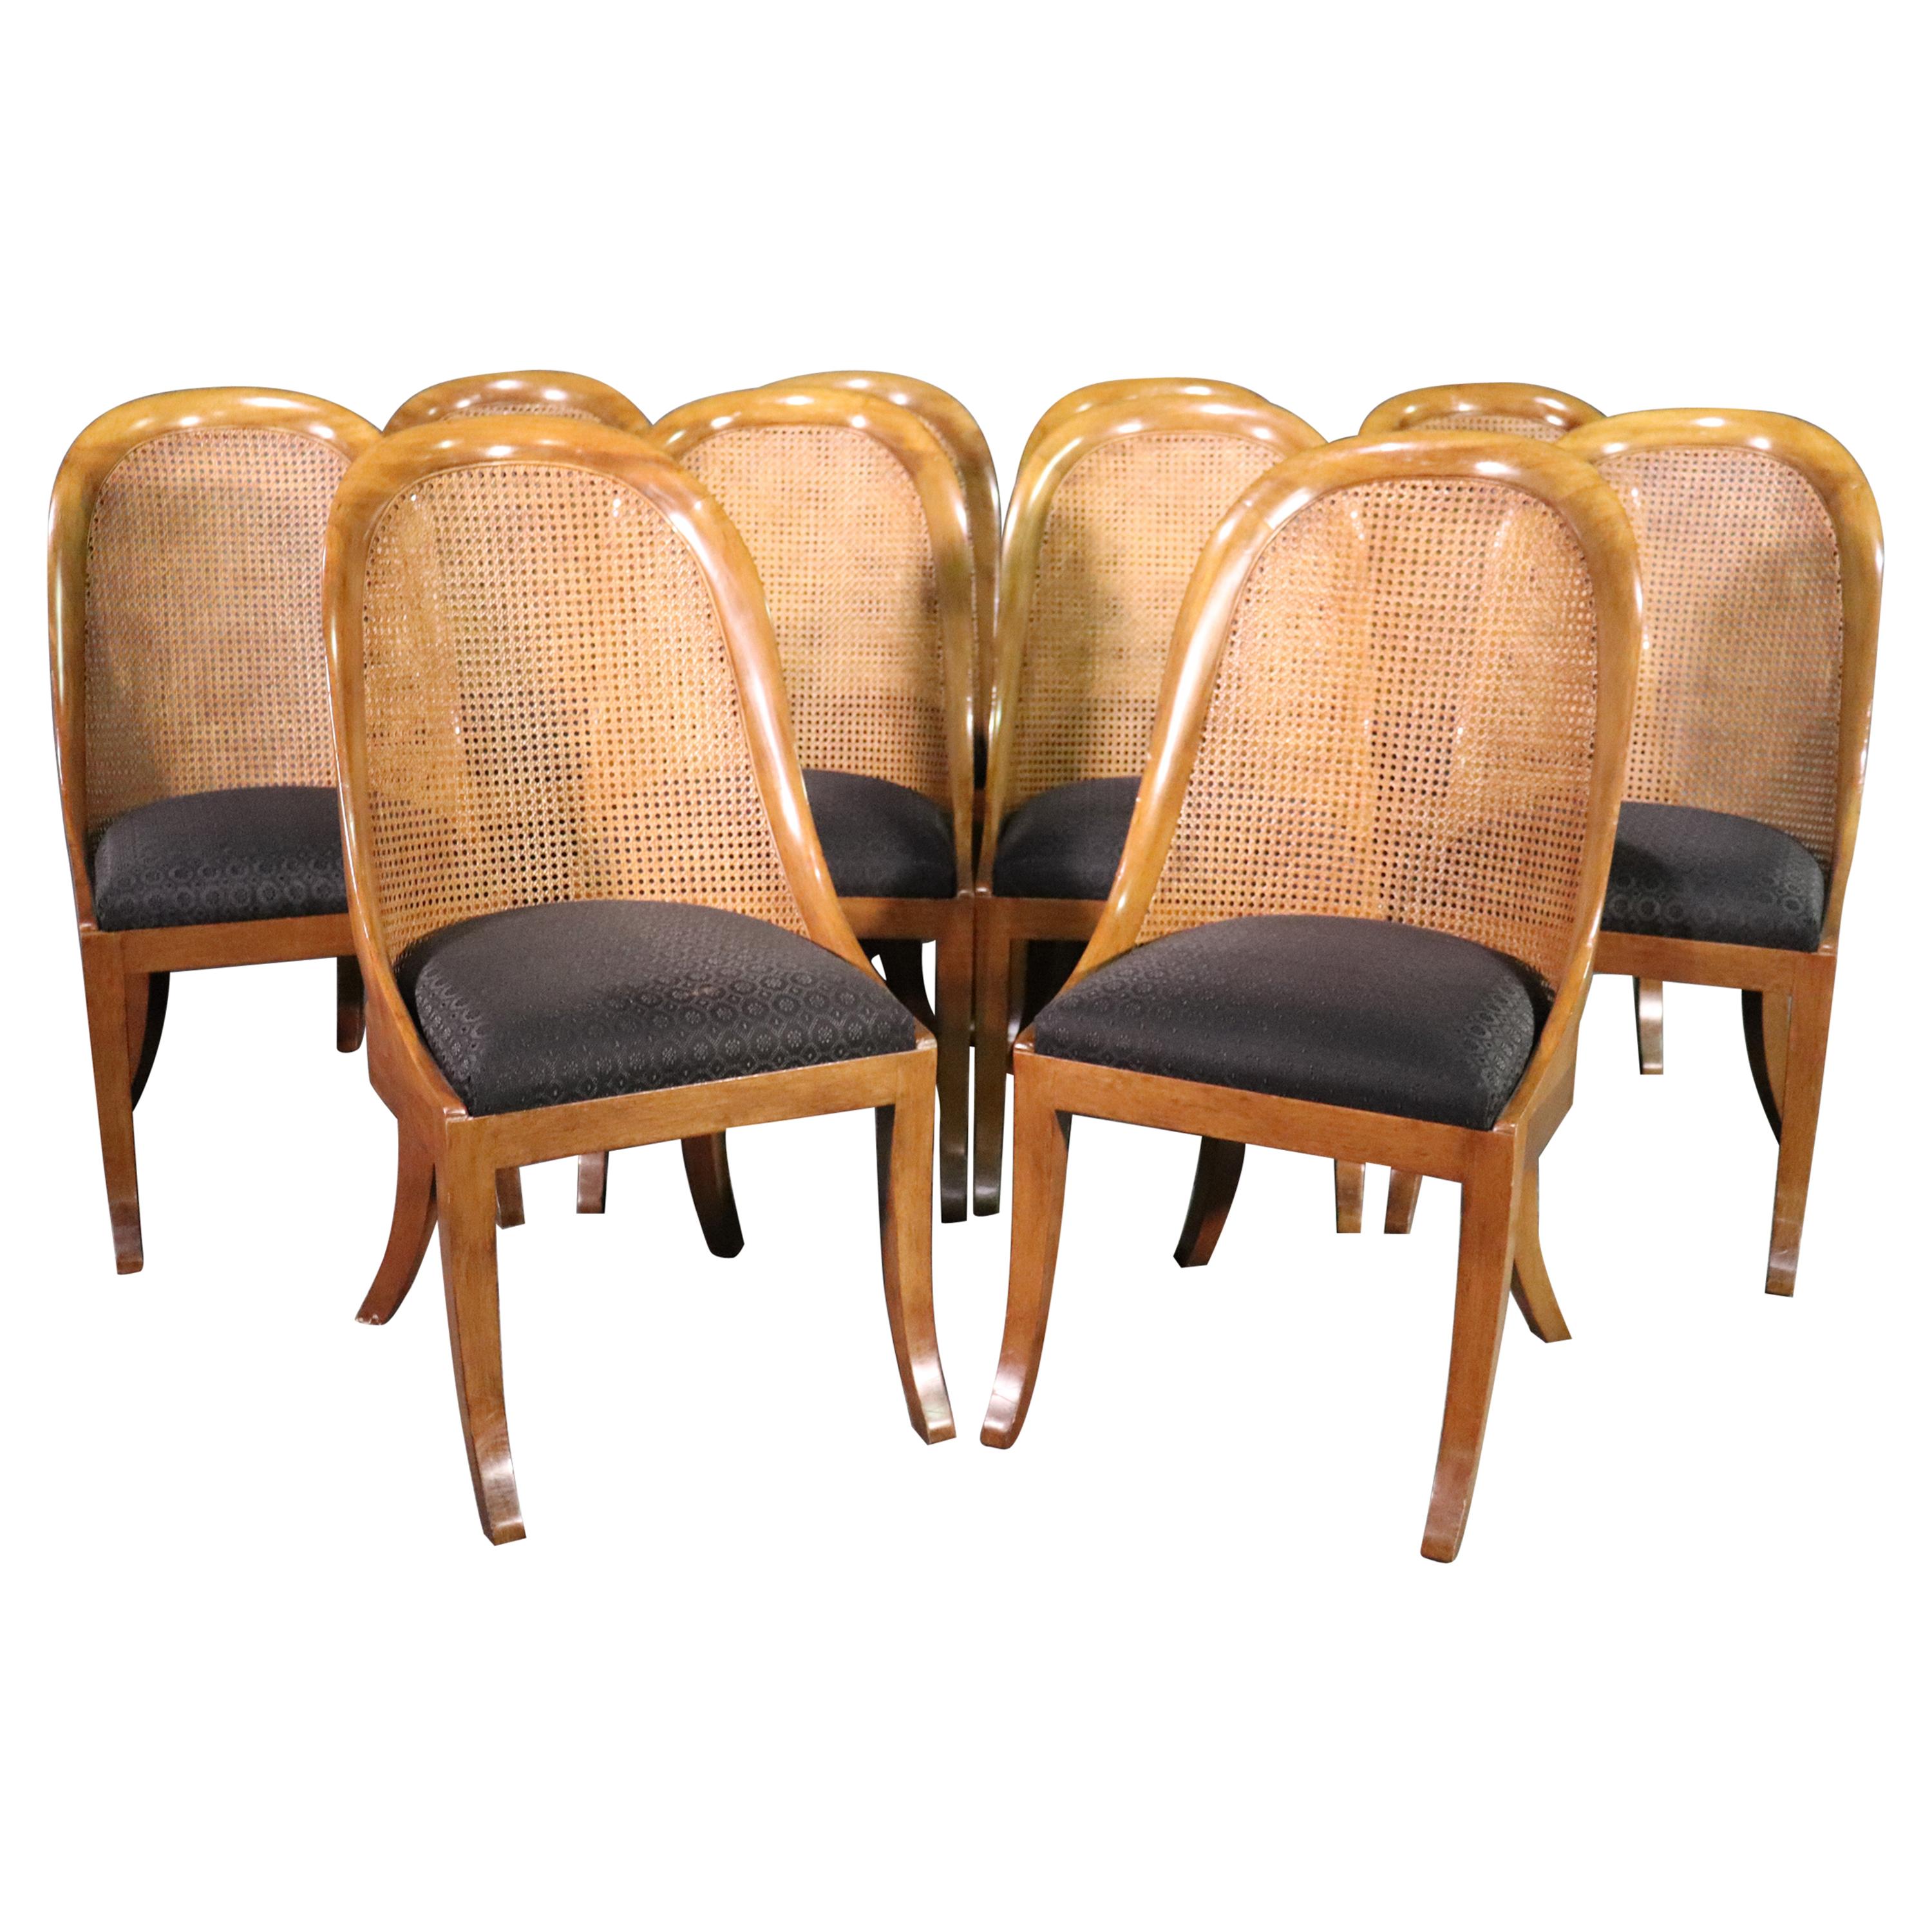 Set of 10 Hollywood Regency Solid Walnut Cane Dining Chairs, circa 1950